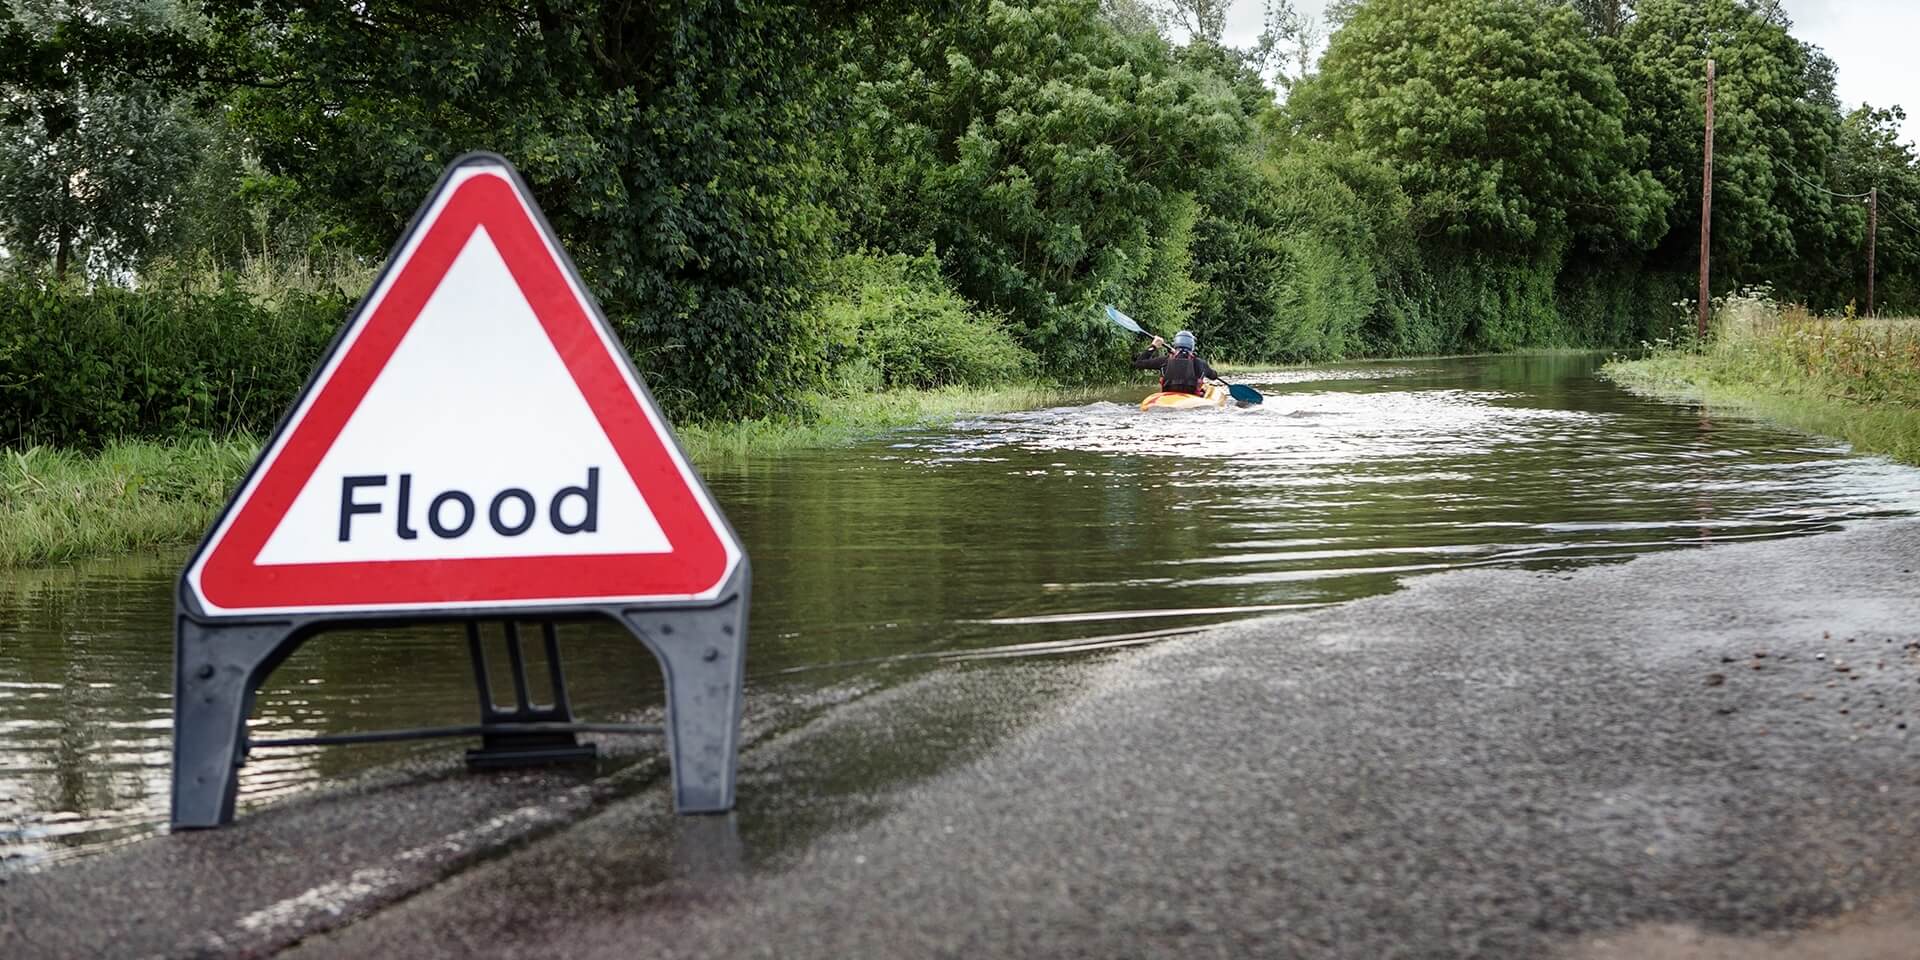 UK Weather: Brits Brace for Flooding as Thunderstorms Prompt Heavy Rain Warning